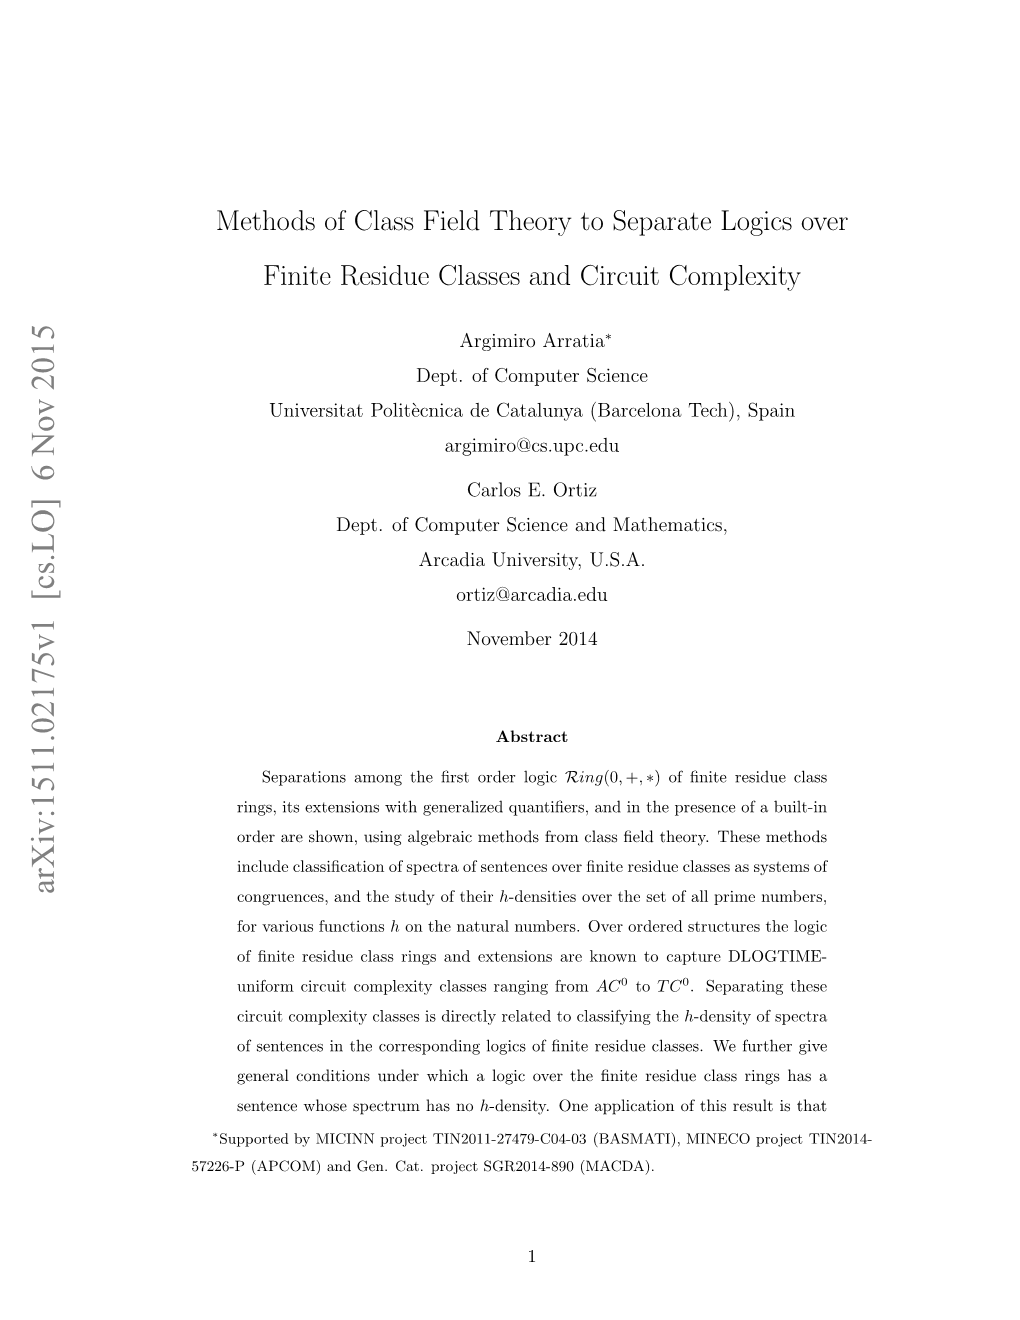 Methods of Class Field Theory to Separate Logics Over Finite